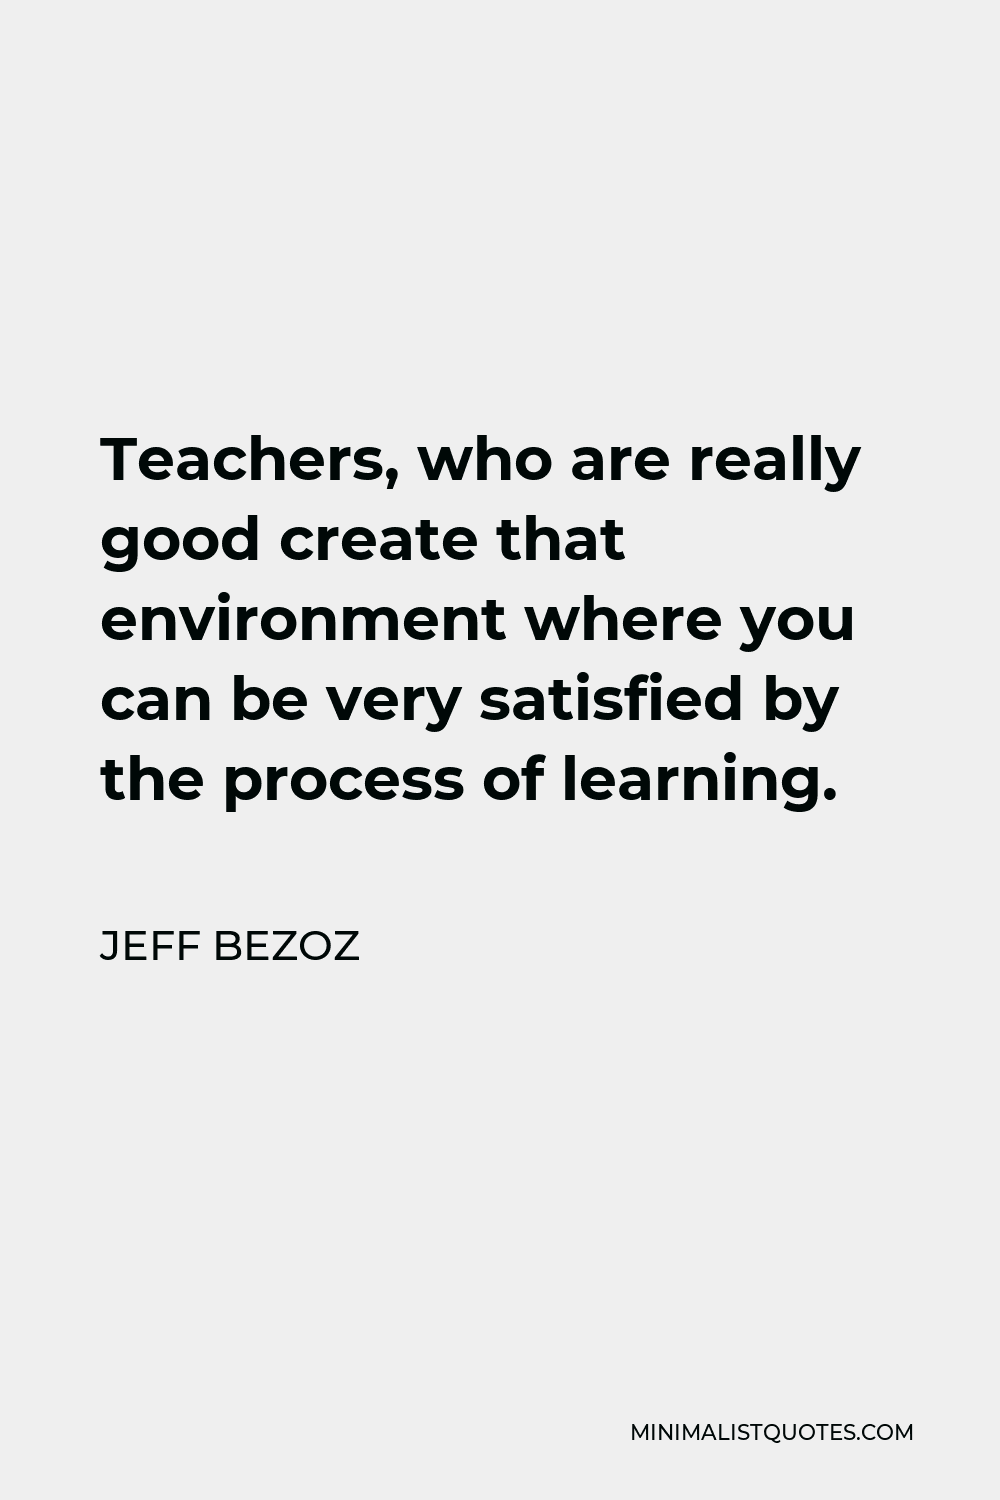 Jeff Bezoz Quote - Teachers, who are really good create that environment where you can be very satisfied by the process of learning.